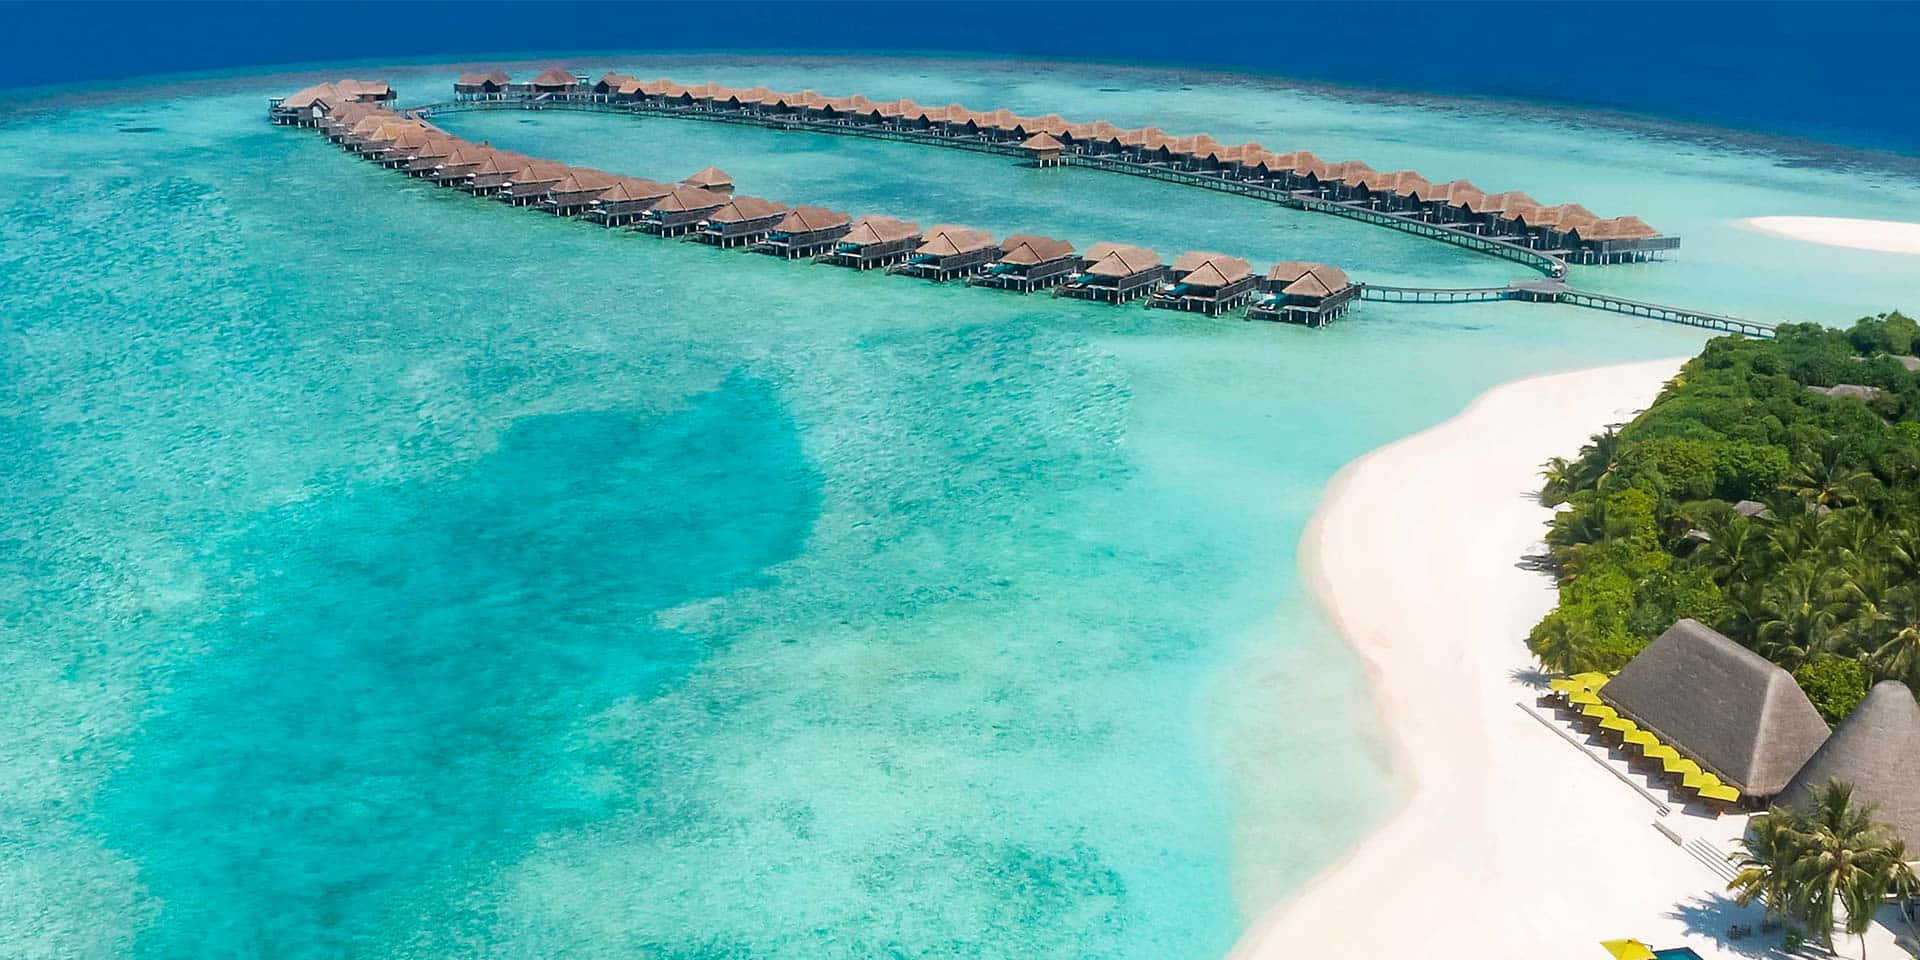 The Picturesque Turquoise Ocean of Maldives